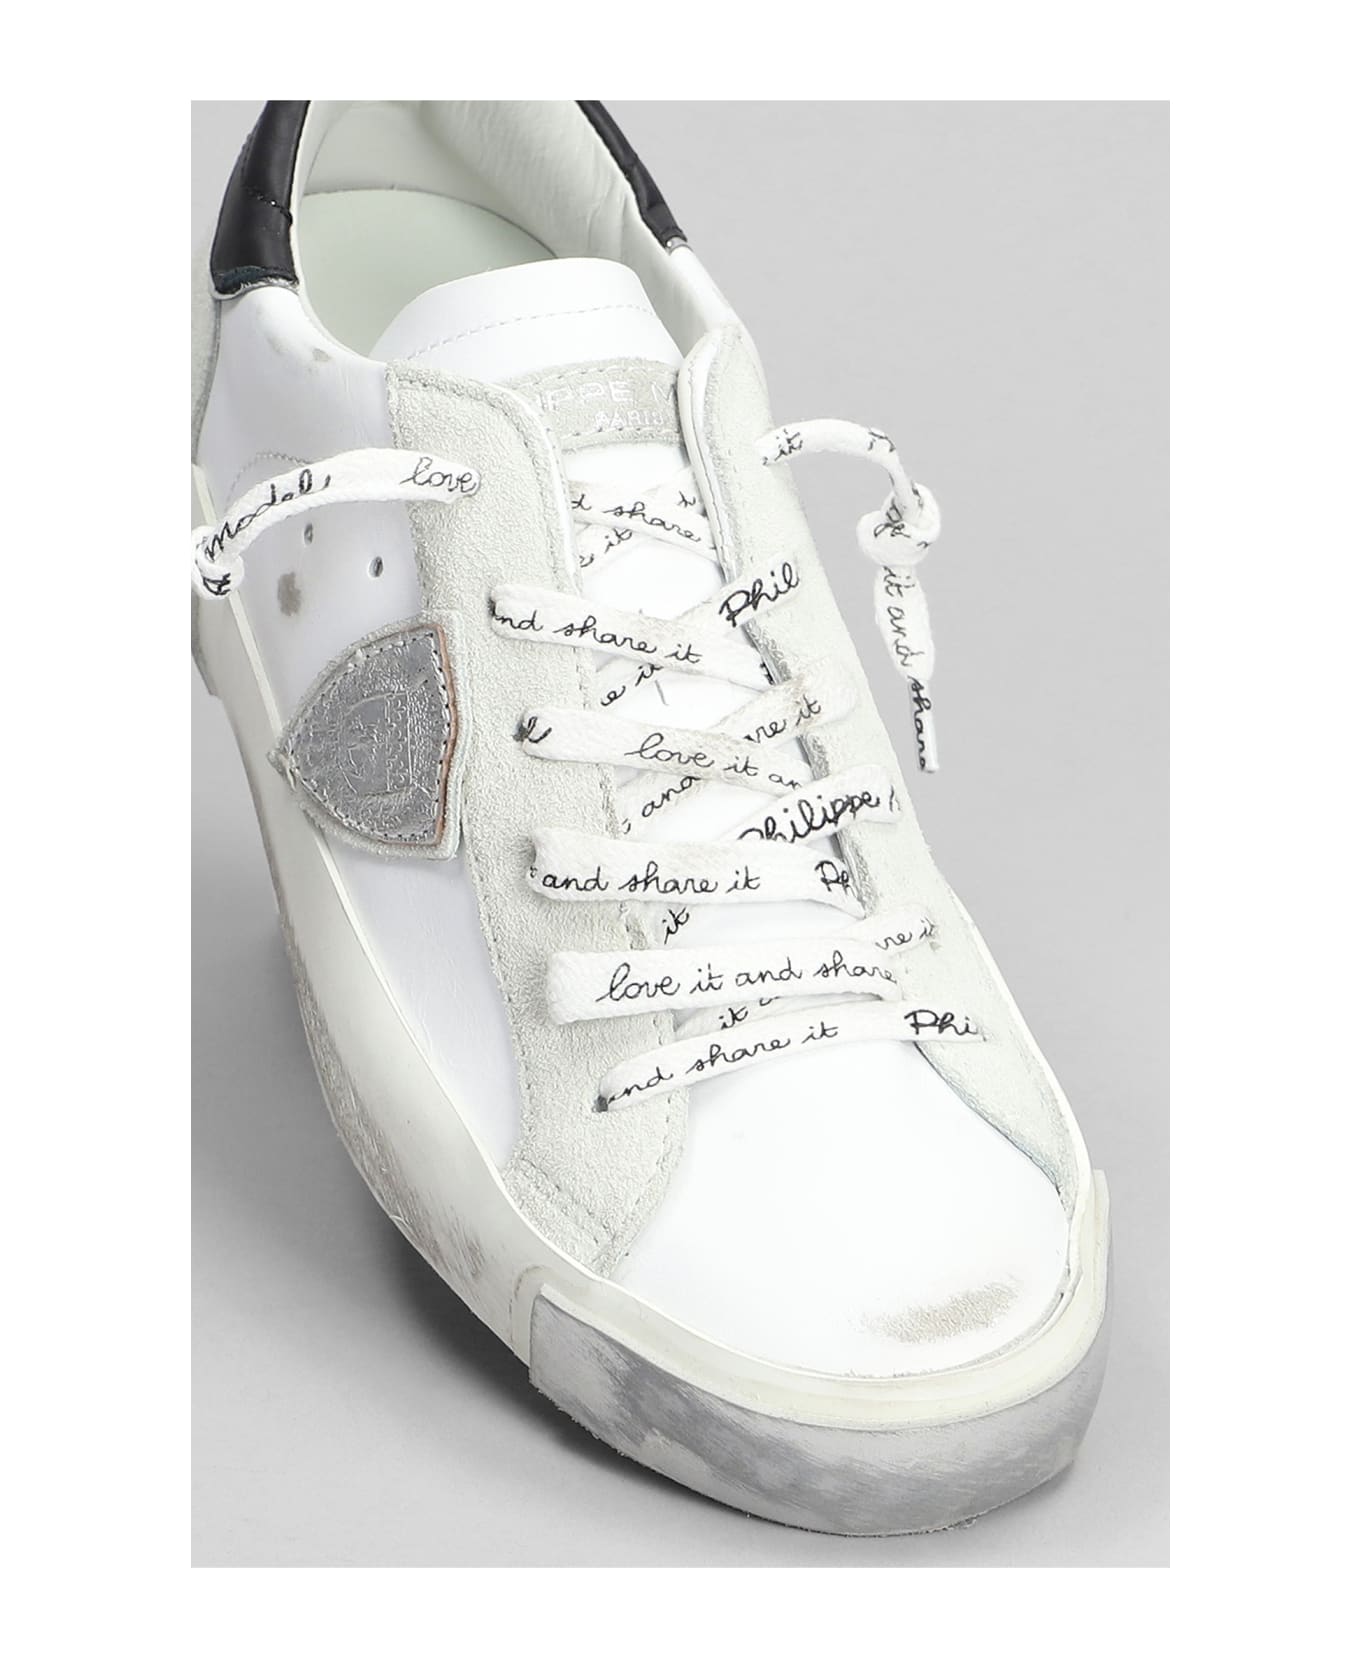 Philippe Model Prsx Low Sneakers In White Suede And Leather - white スニーカー